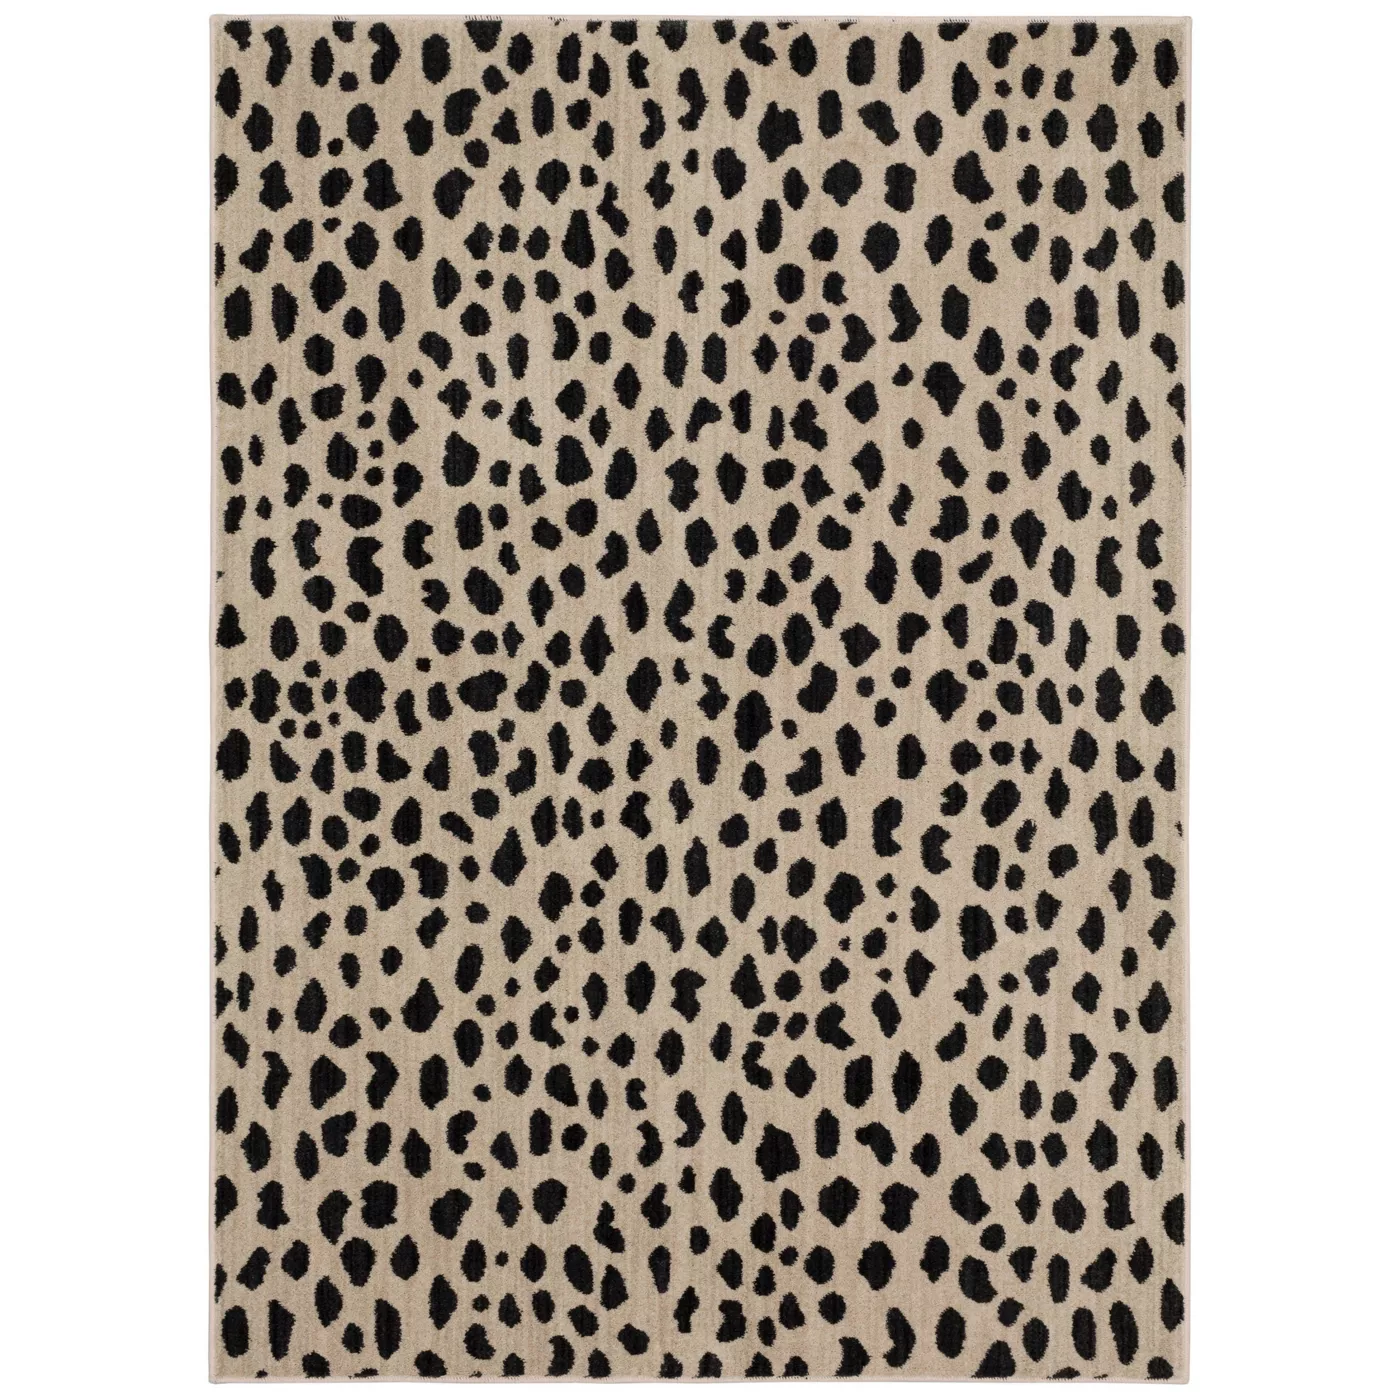 Leopard Spot Woven Rug - Opalhouse™ - image 1 of 9